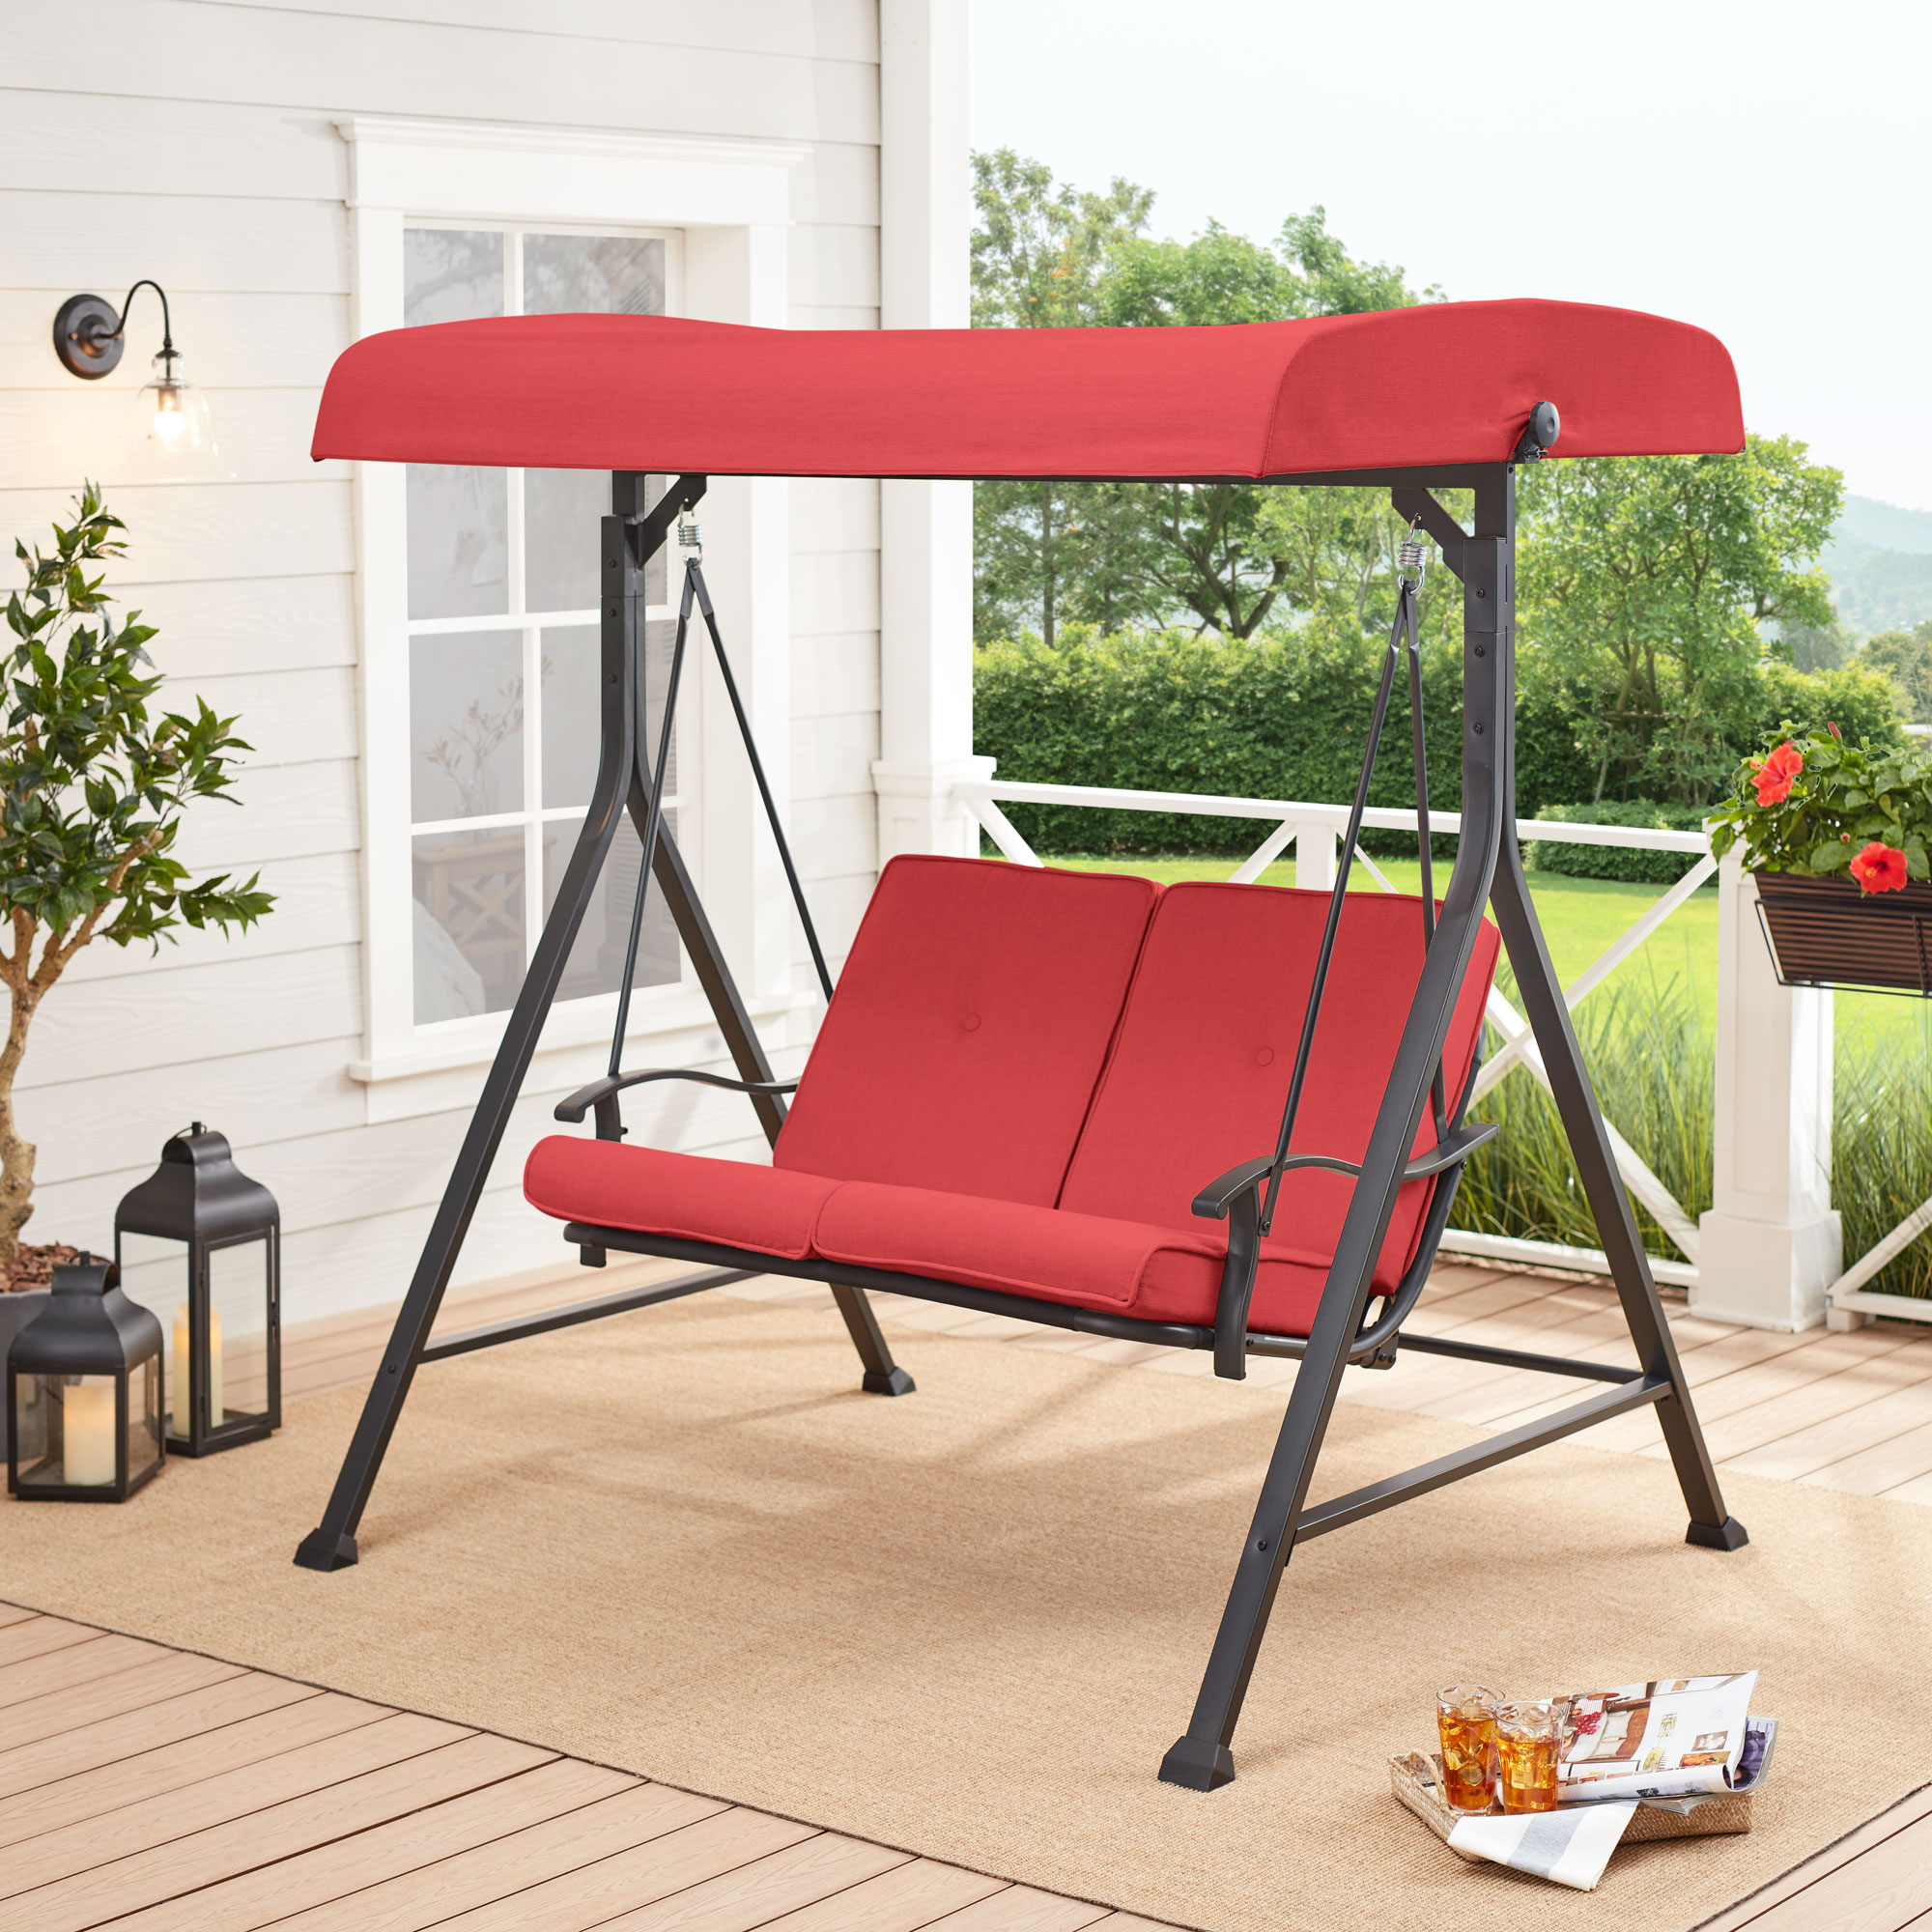 Mainstays Belden Park 2-Person Outdoor Furniture Patio Swing with Canopy, Red - image 1 of 7